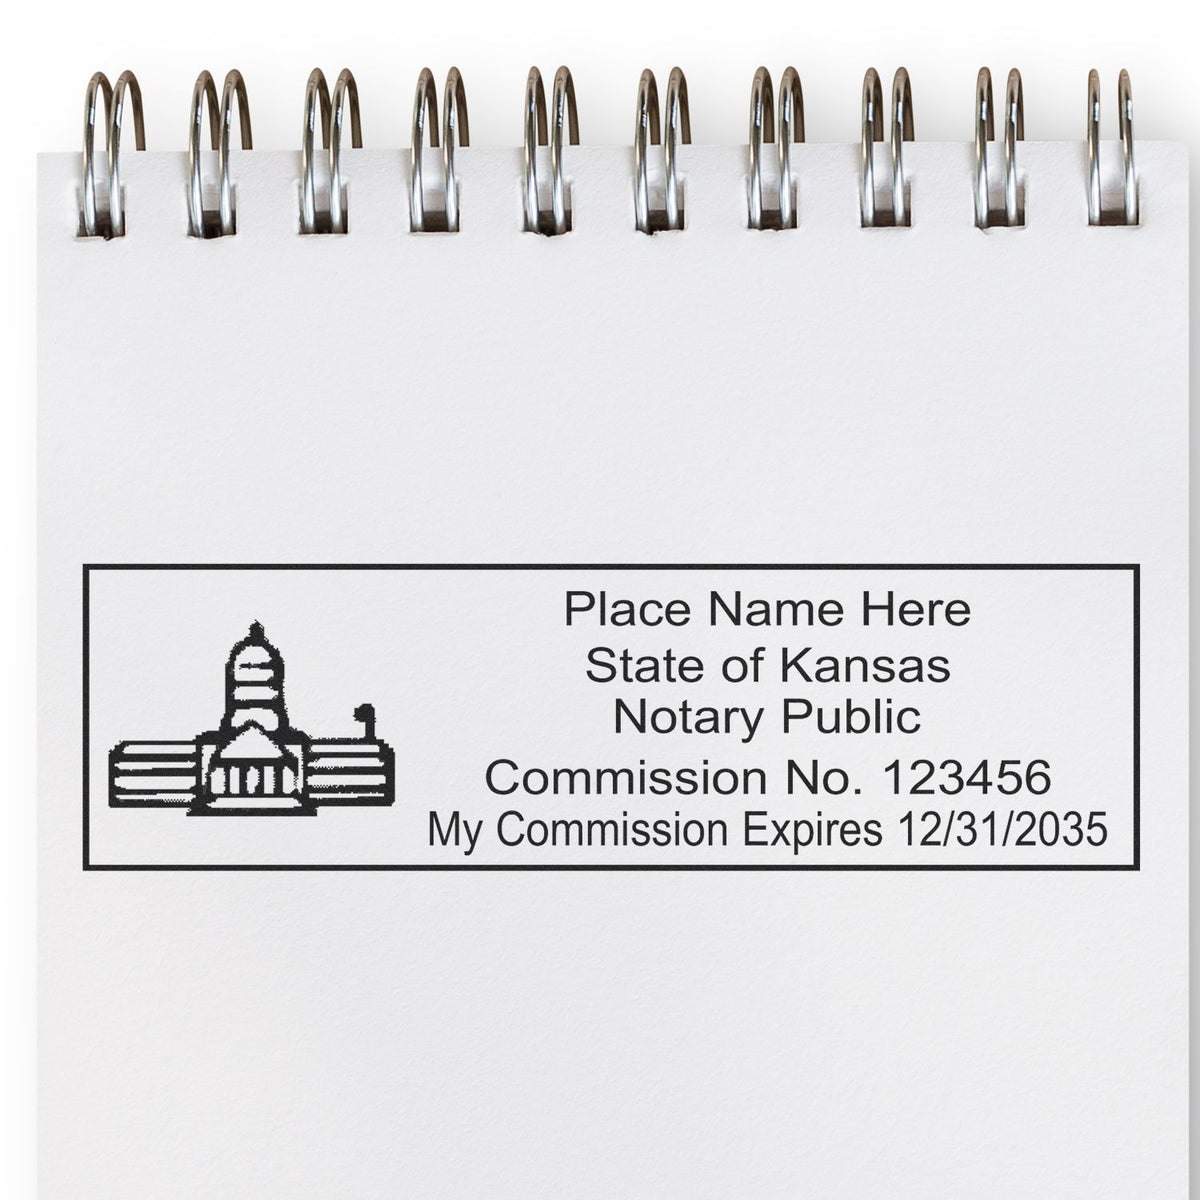 The Super Slim Kansas Notary Public Stamp stamp impression comes to life with a crisp, detailed photo on paper - showcasing true professional quality.